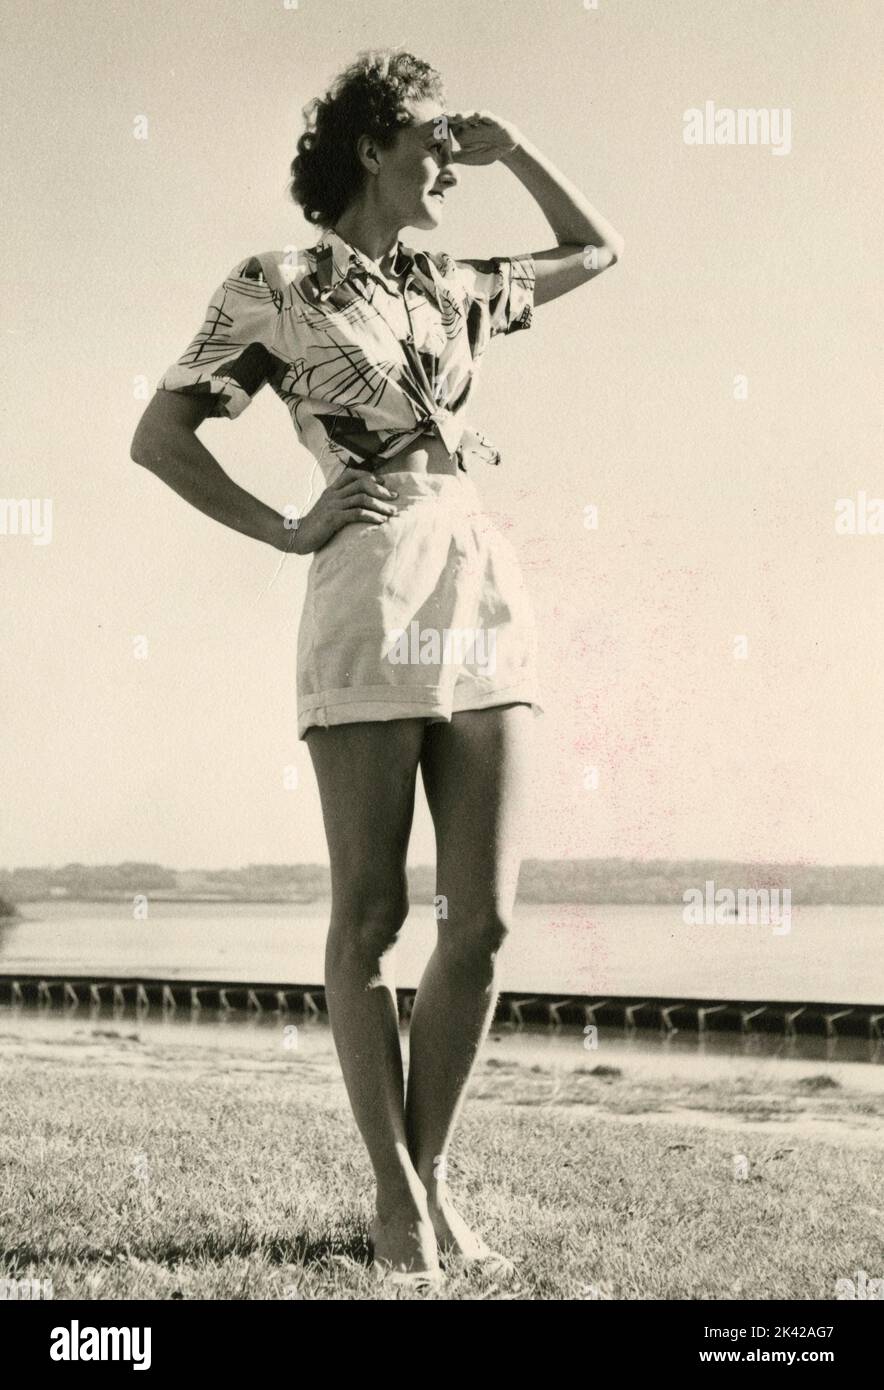 Full-lenght portrait of Laura Tuckerman at the beach in shorts, Italy 1940s Stock Photo